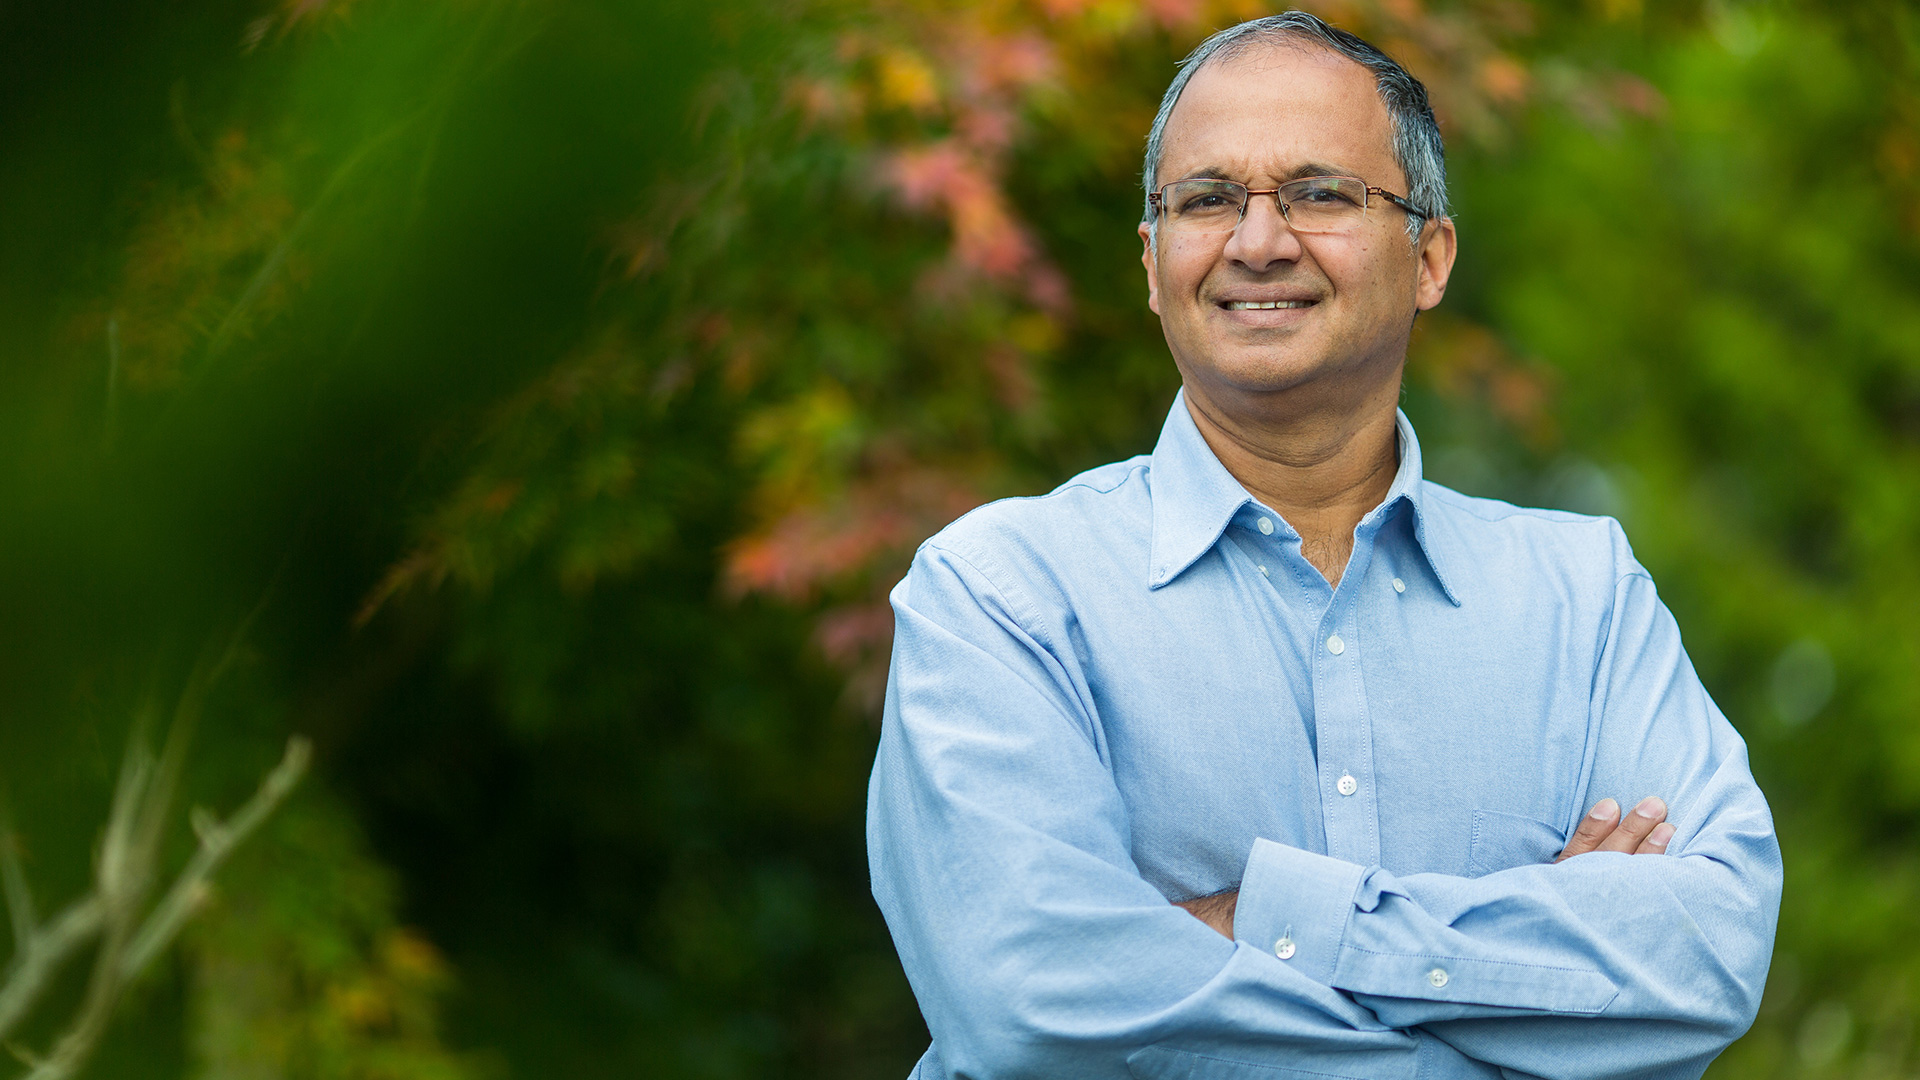 Arul Menezes standing with arms folded in front of green foliage in the background